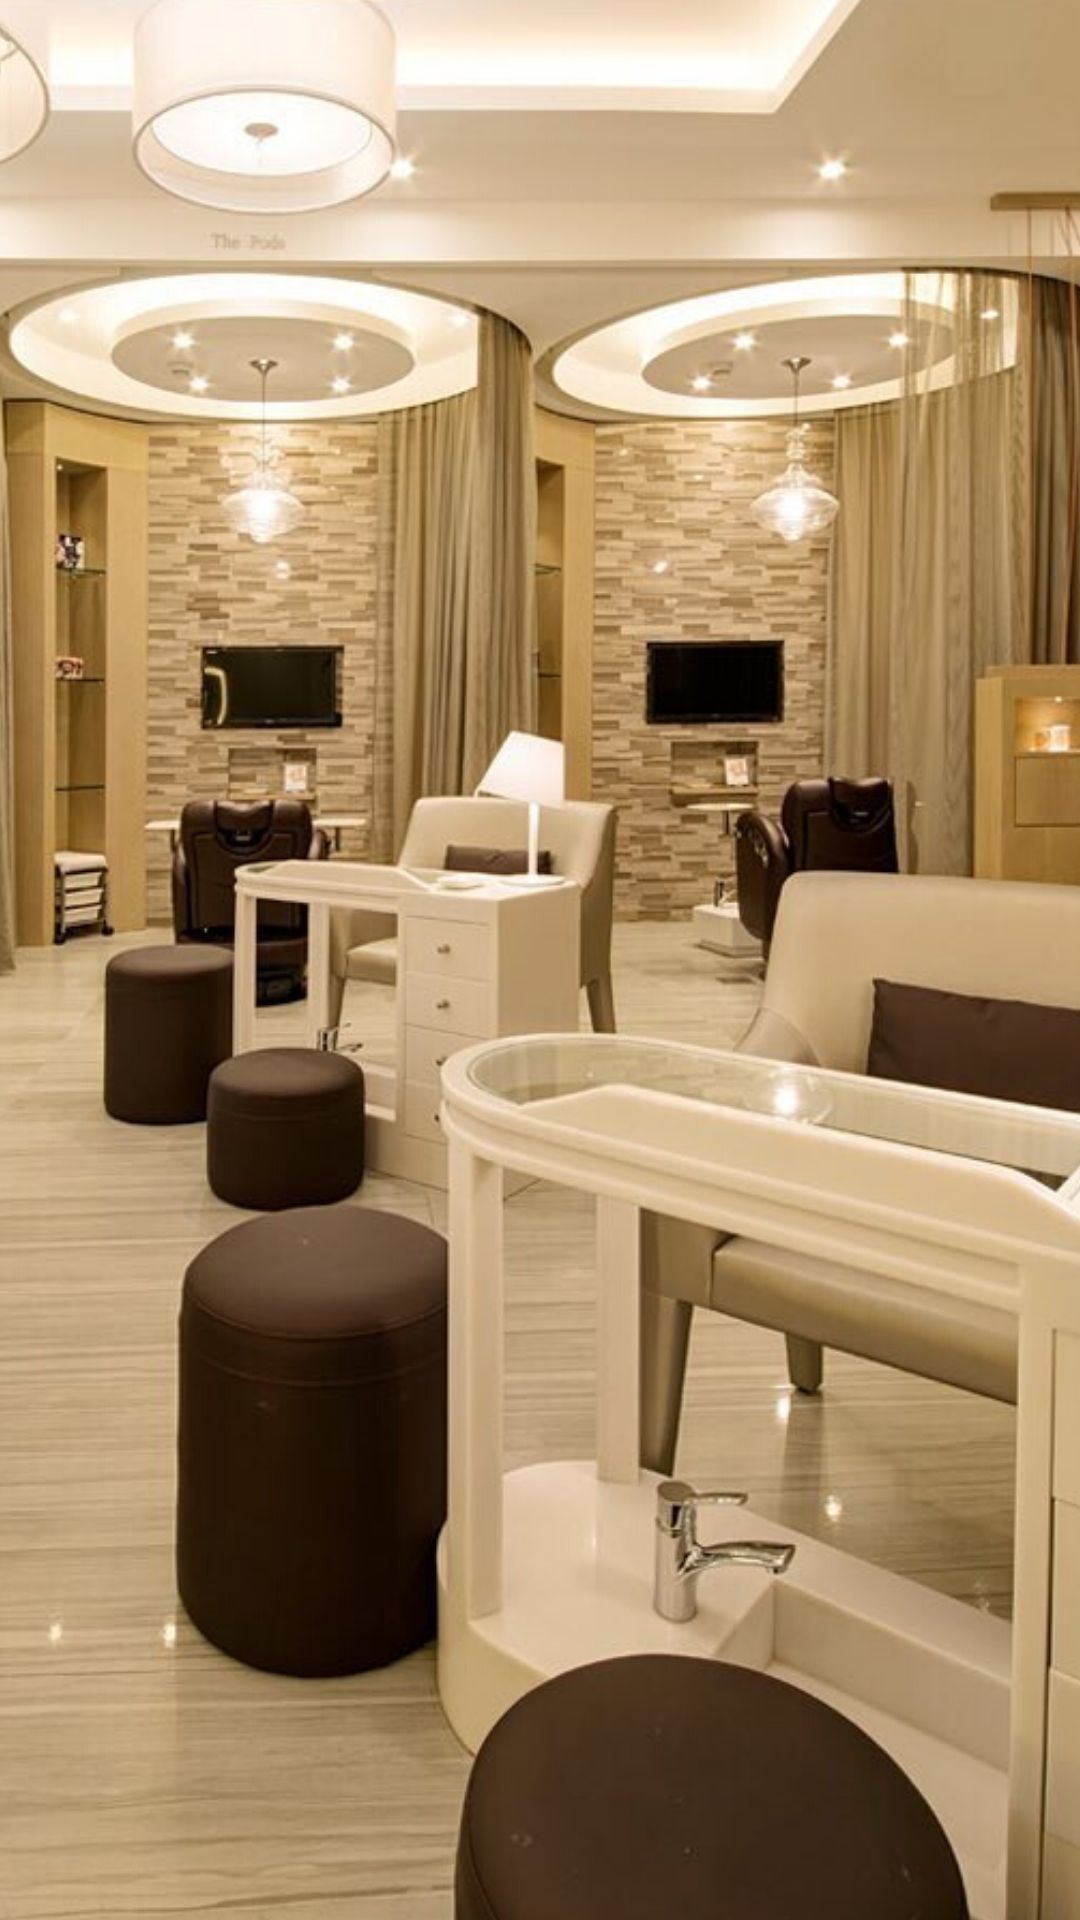 Top 10 Beauty Salons In Dubai That'll Have You Looking SNATCHED!